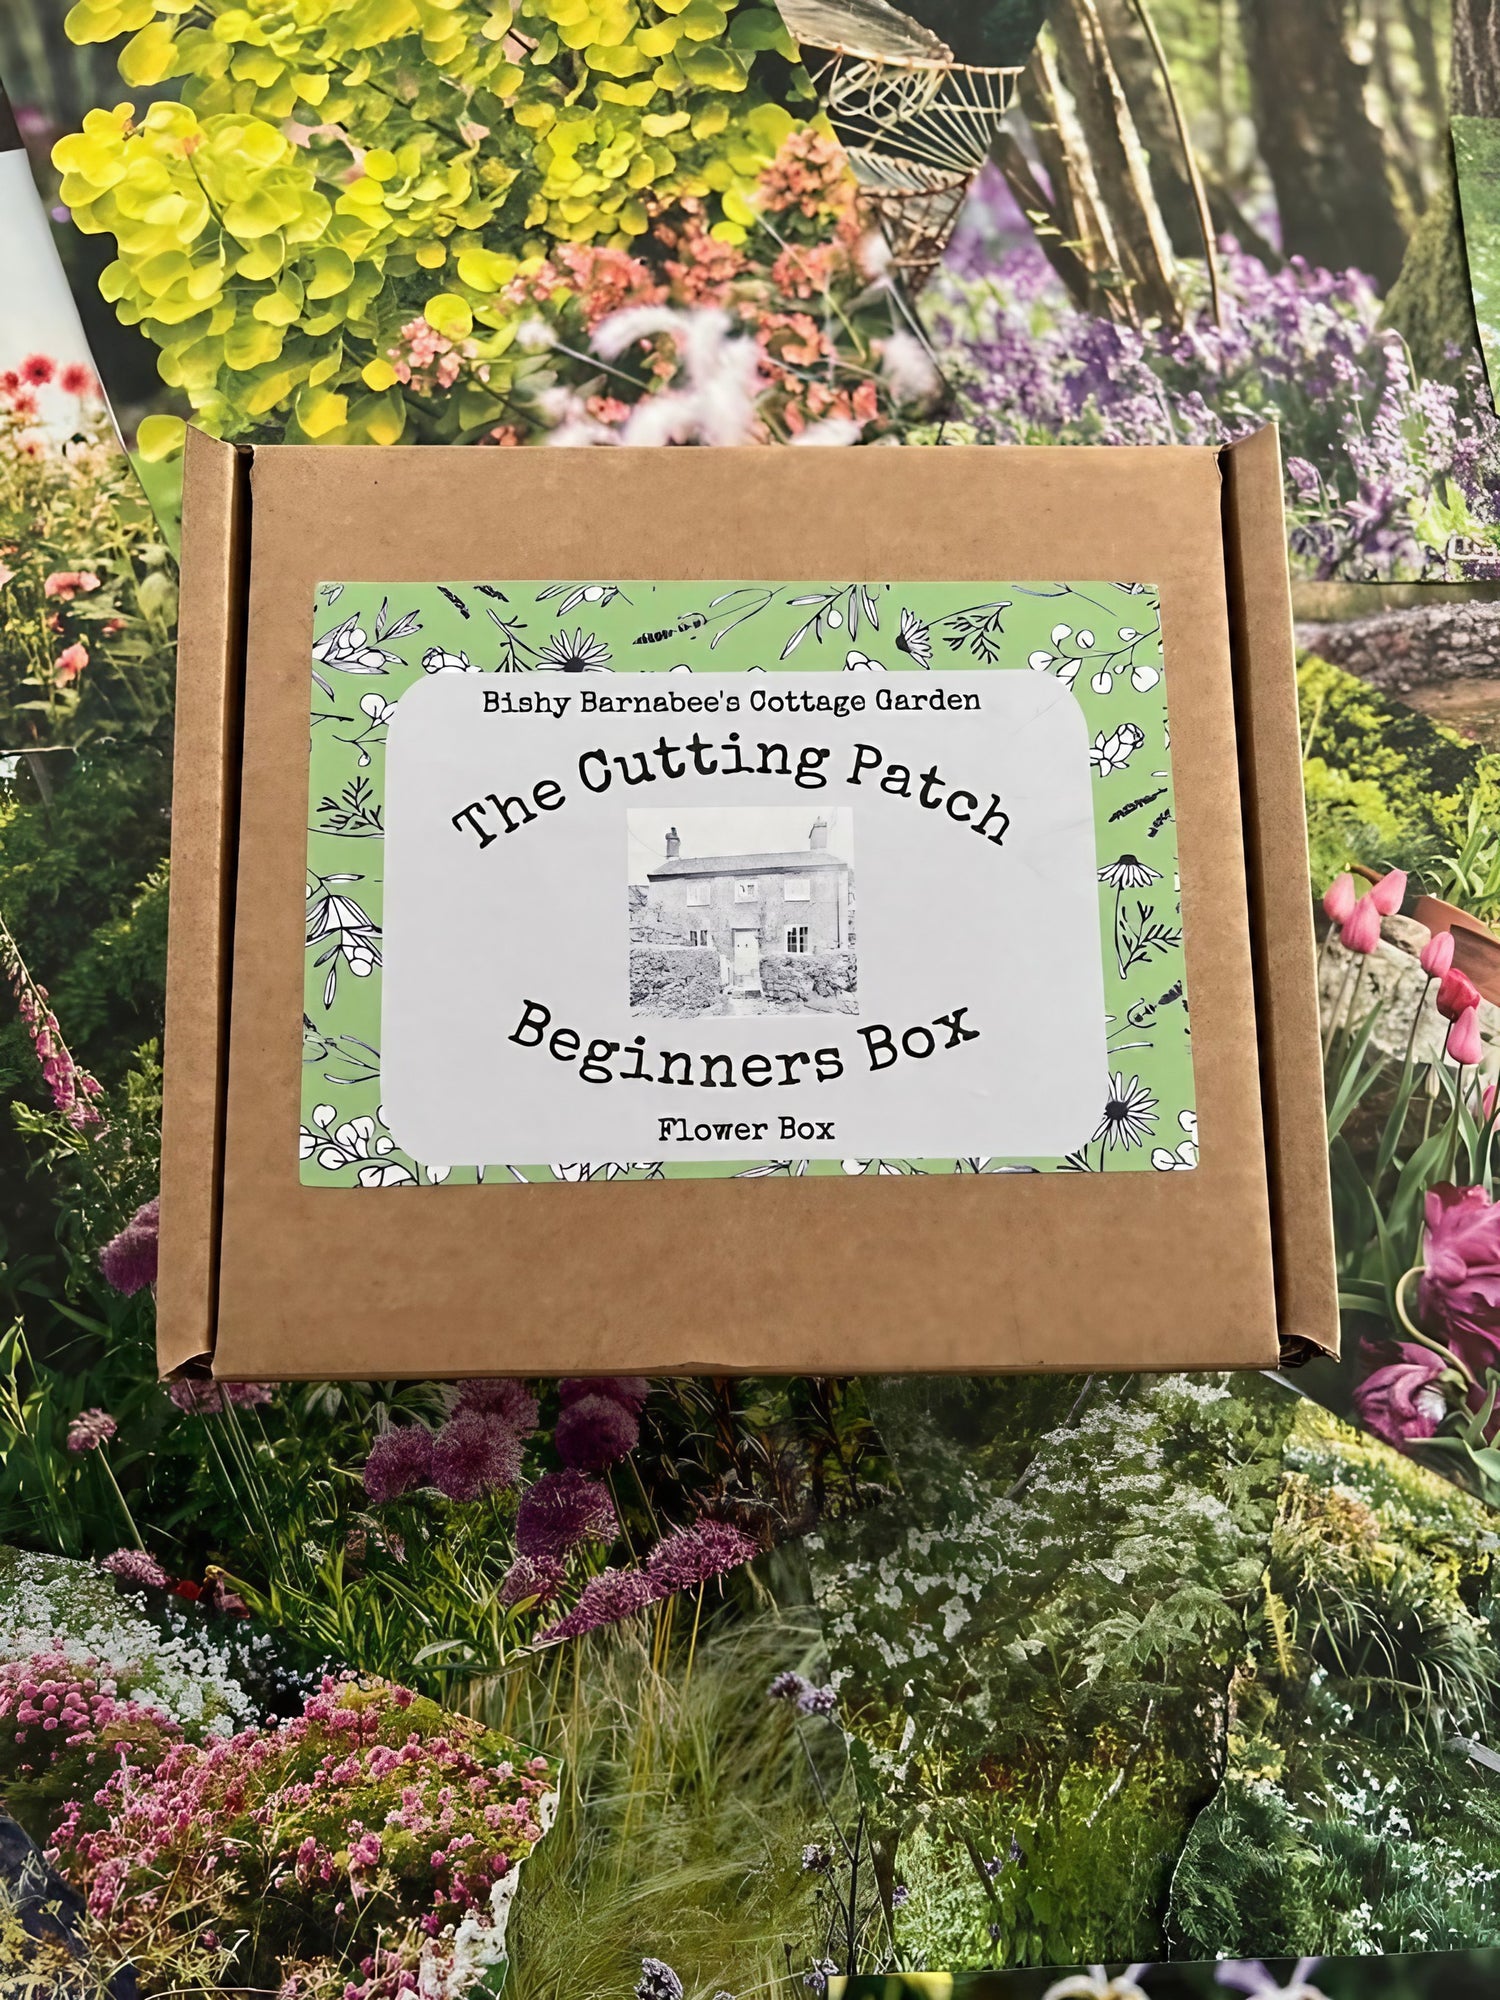 The Cutting Patch Beginners Flower Box